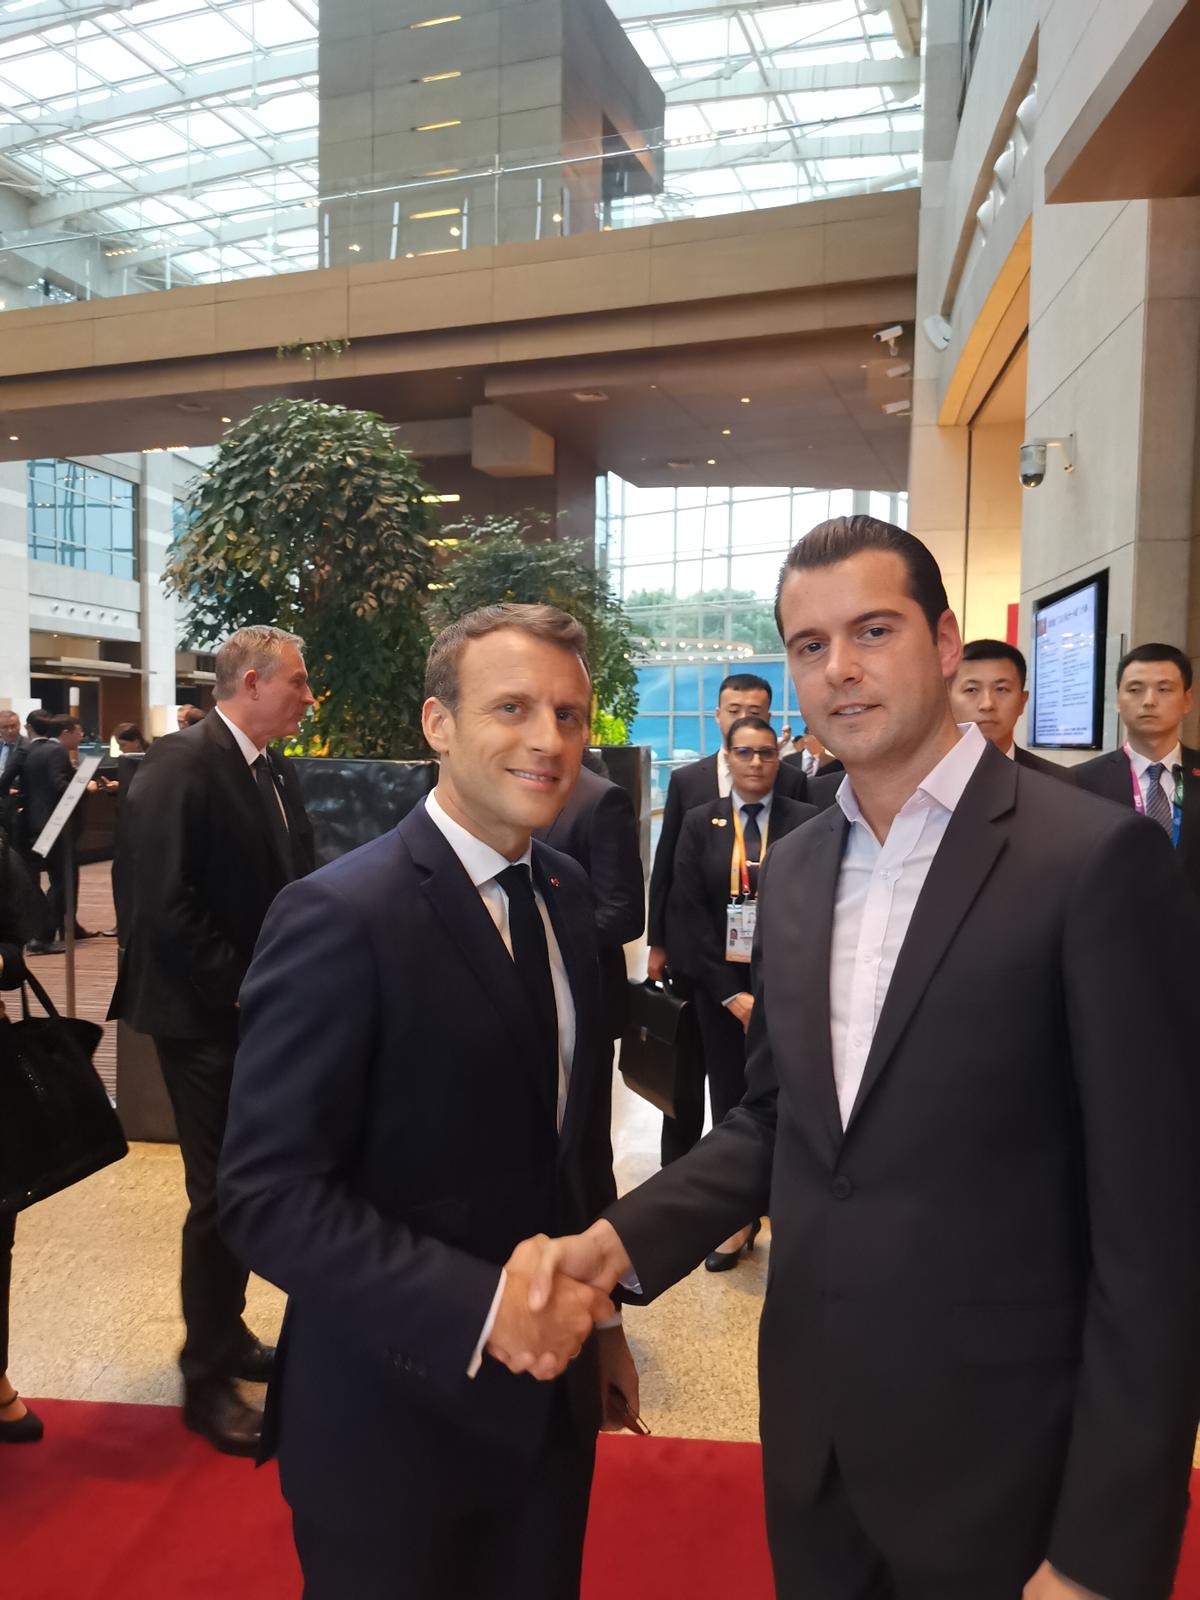 French President Emmanuel Macron meets BOIRON in China